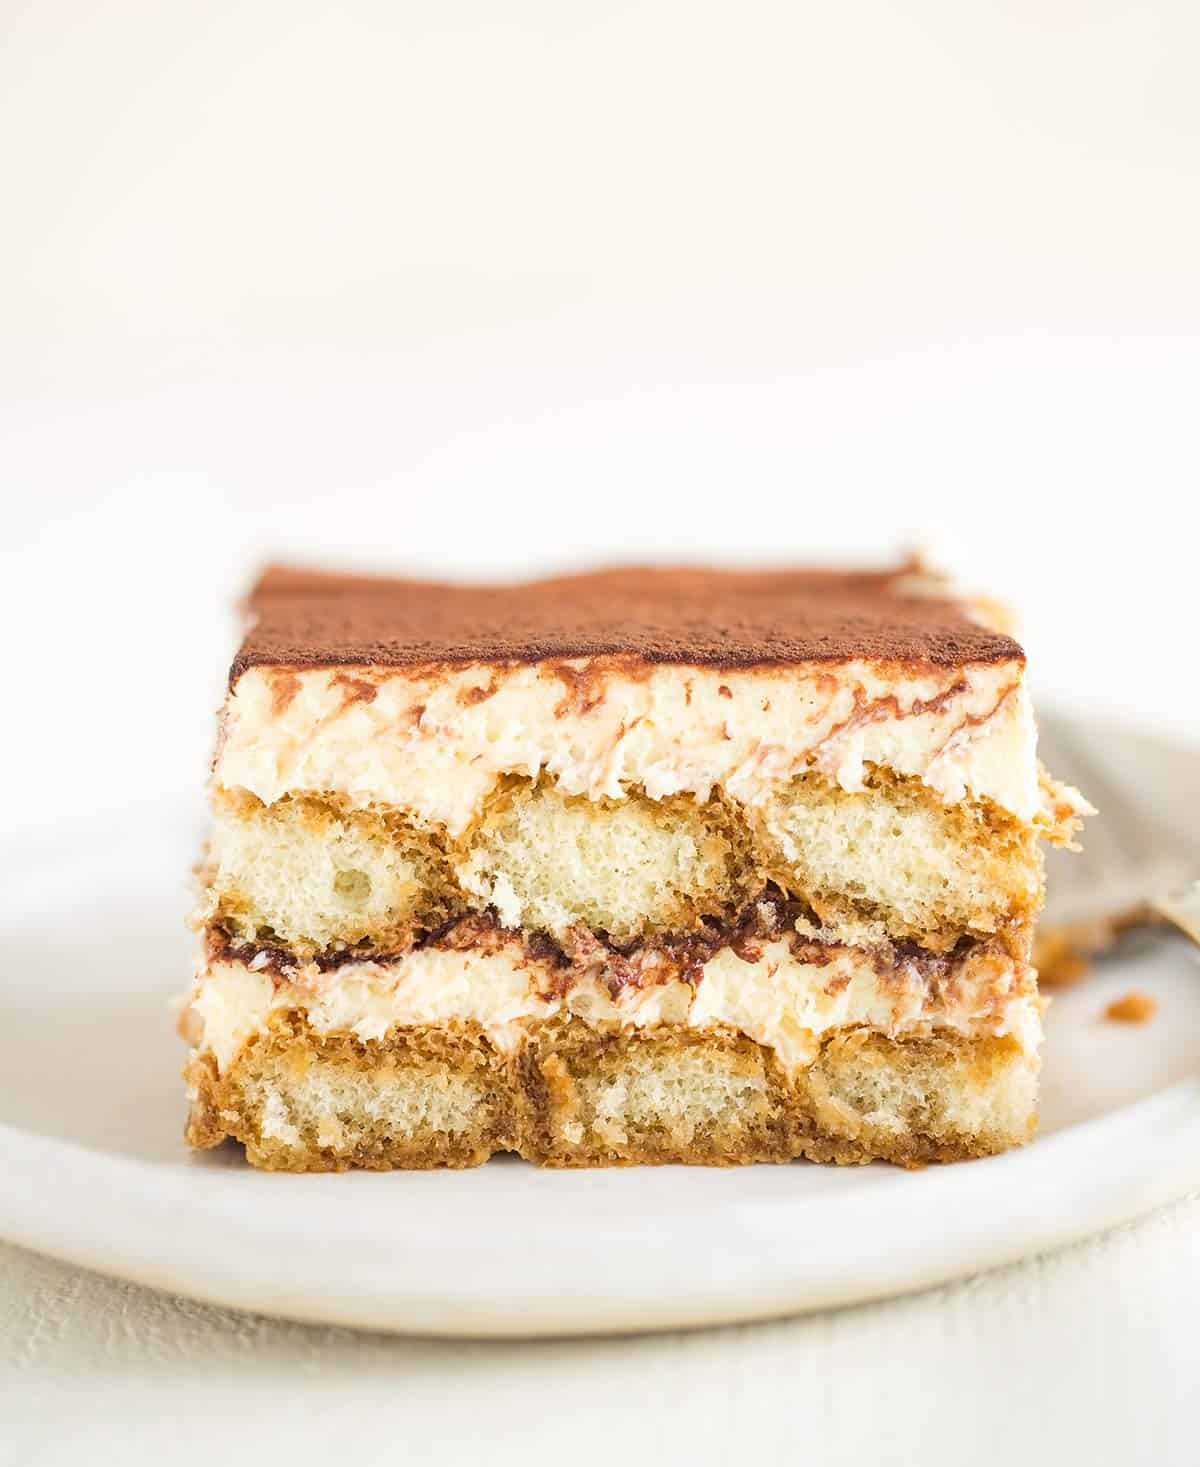 A white plate with a slice of tiramisu with the exposed layers showing on the side.